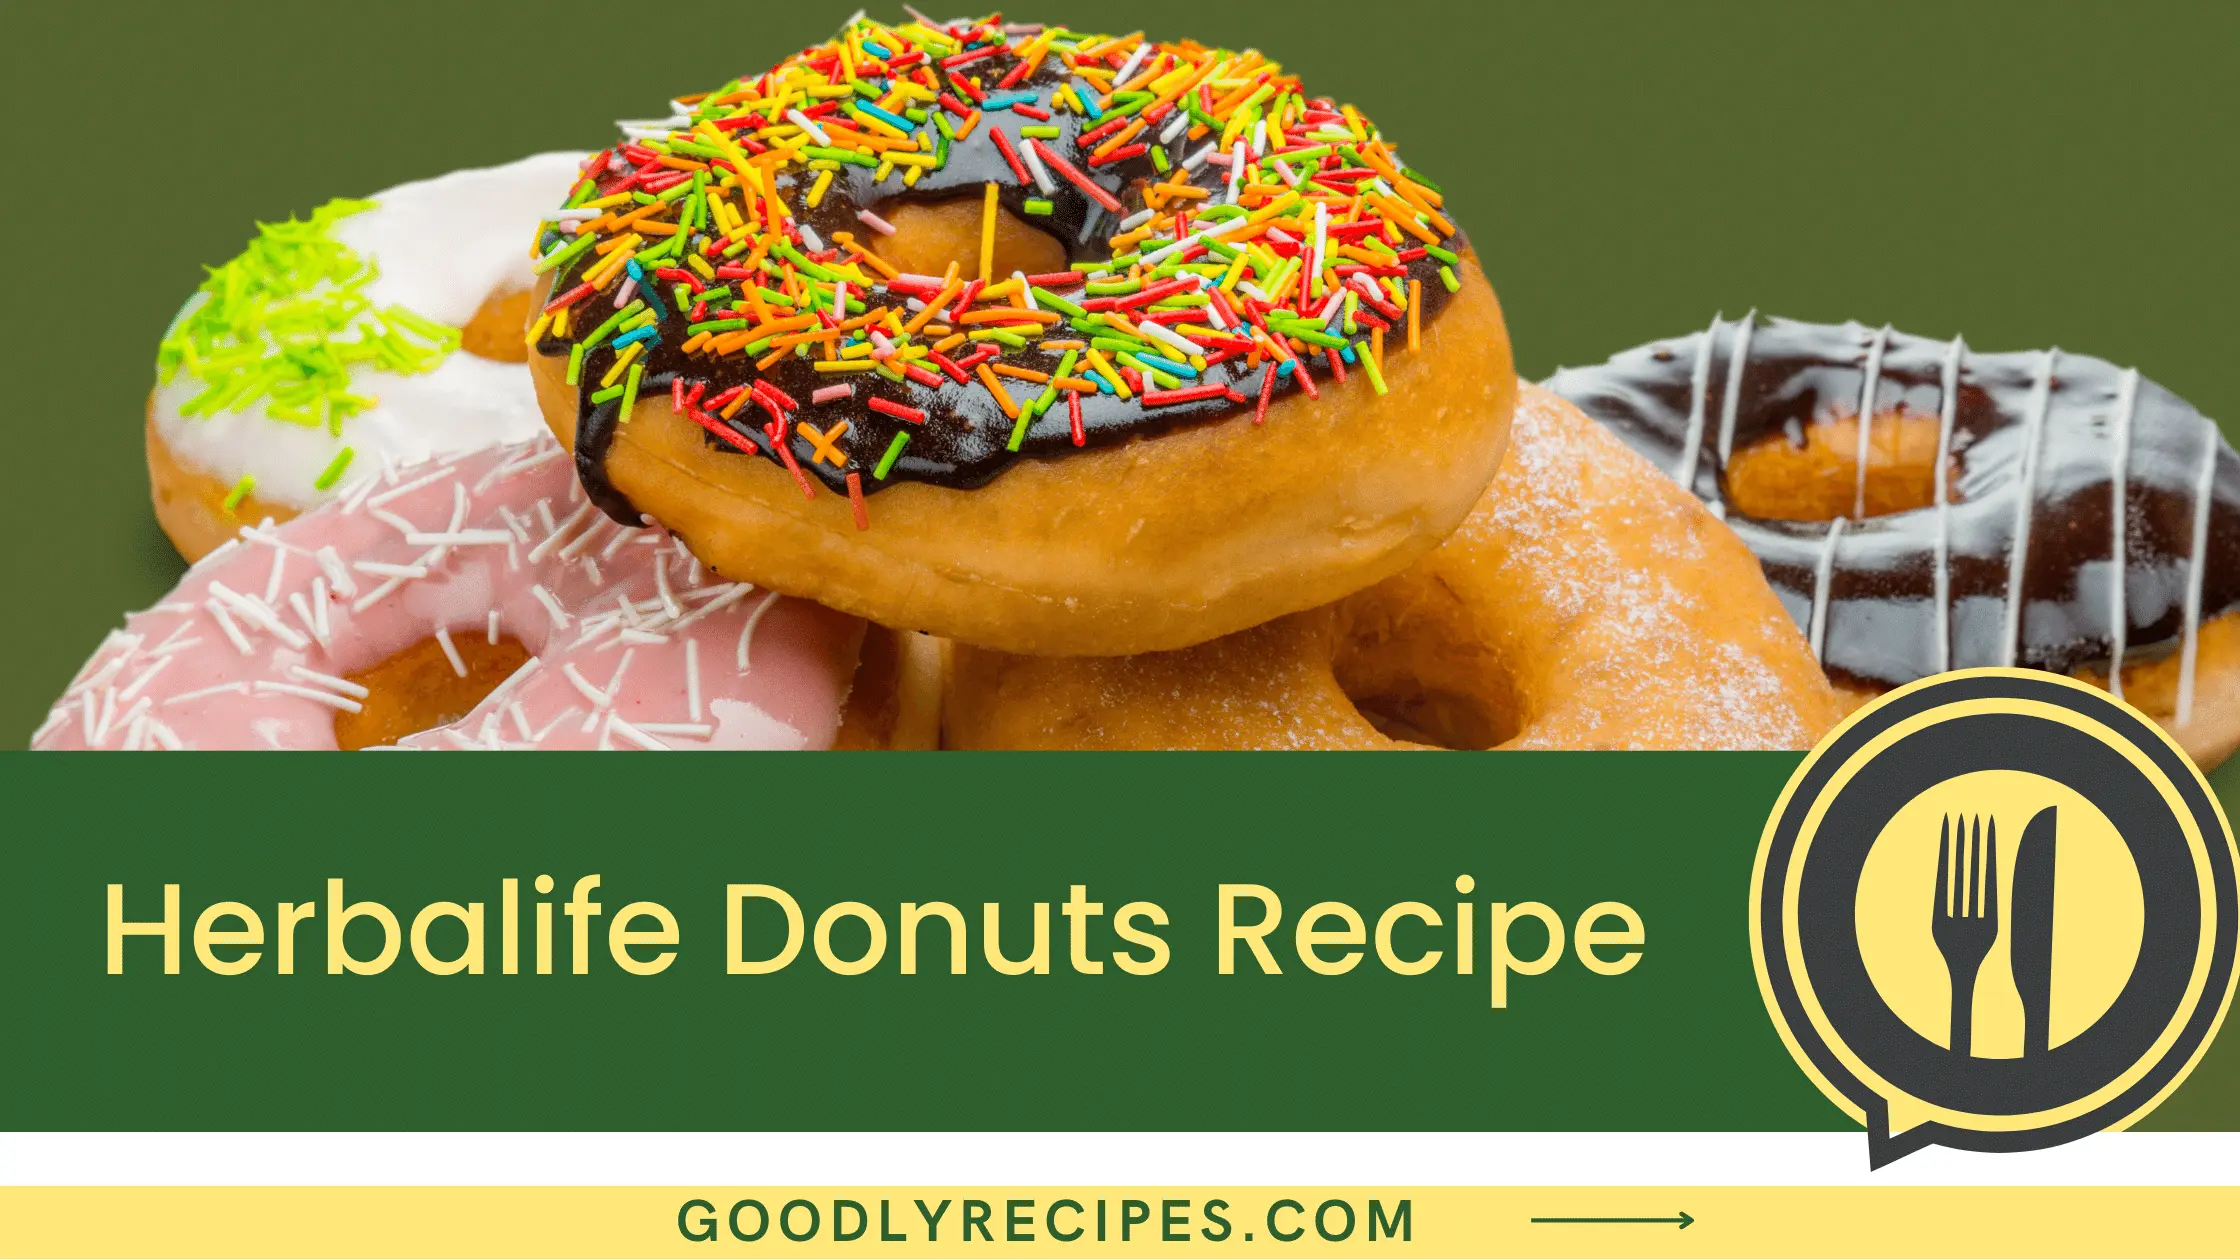 What is Herbalife Donuts?